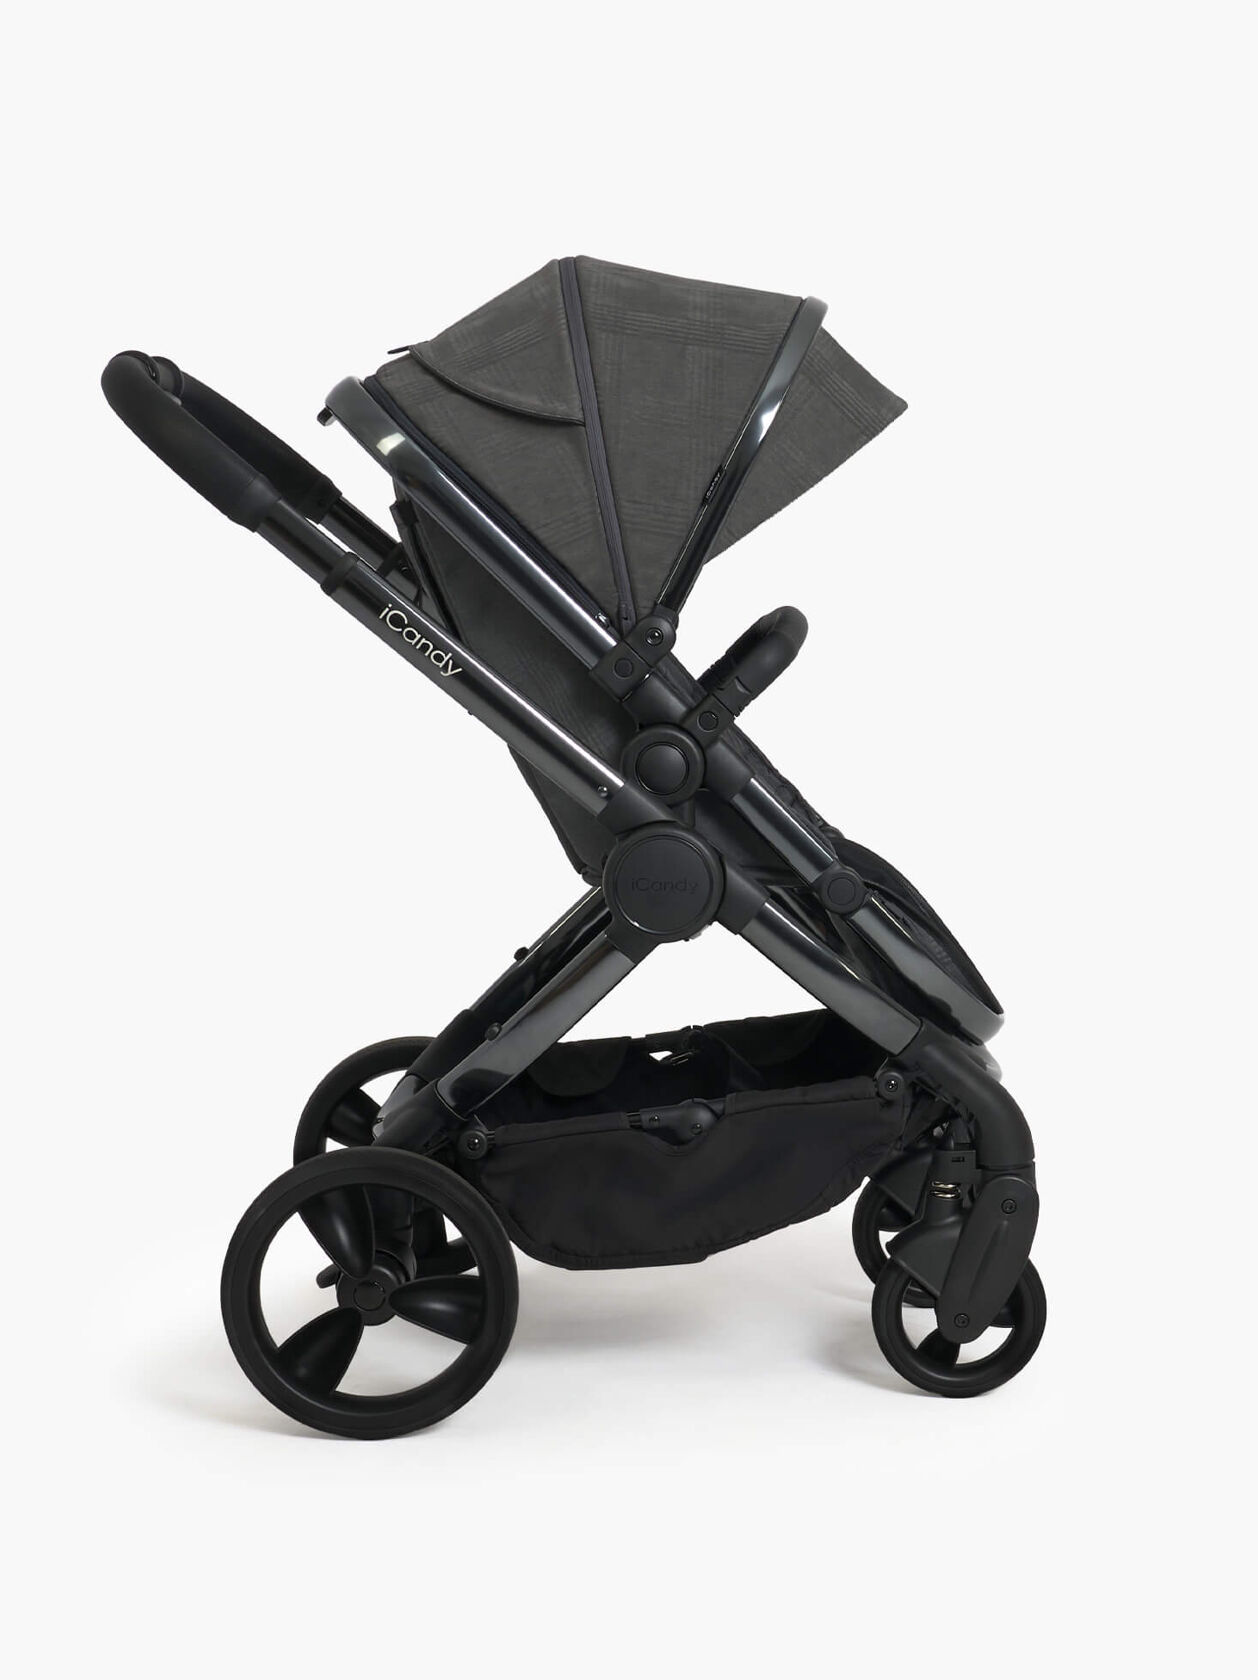 Peach Pushchair and Carrycot - Travel Accessory Deal